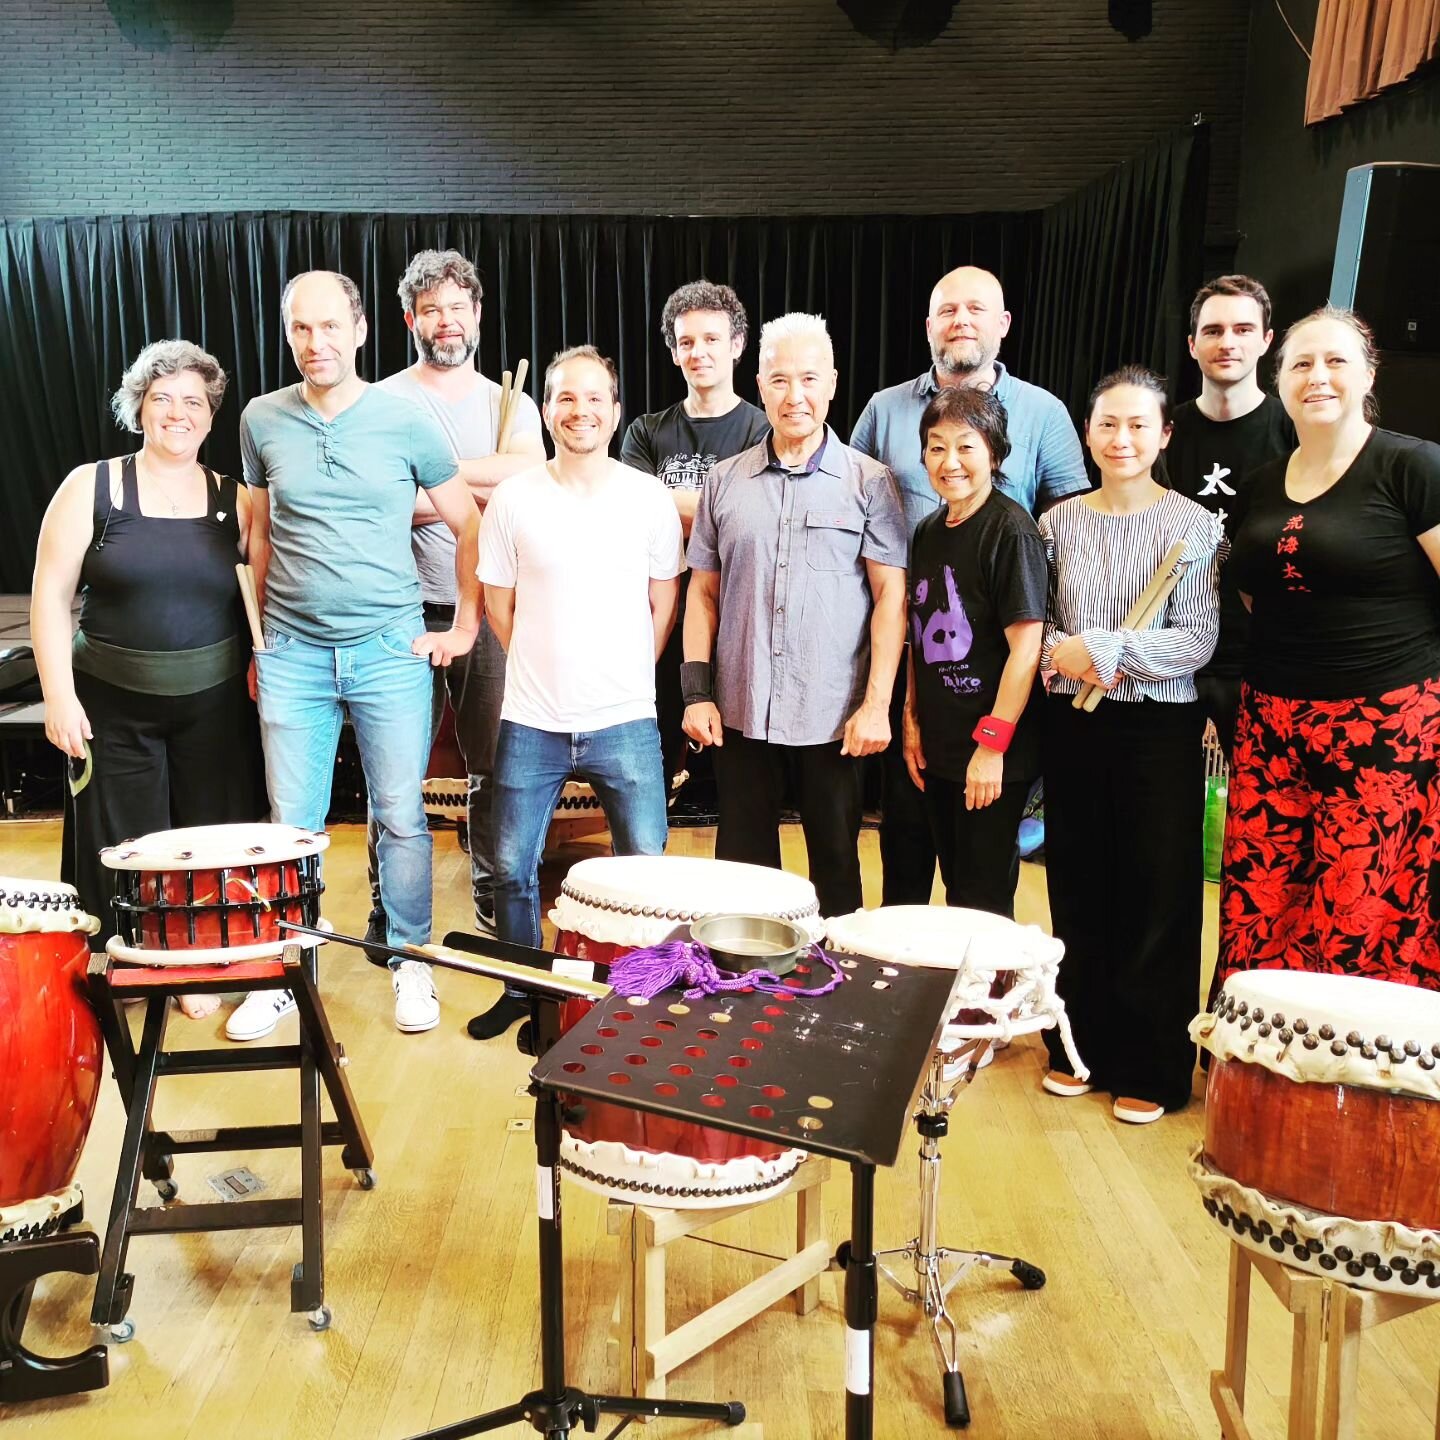 Workshop drums Taiko and more. 
Thank to Academie Hoboken, Academie Schoten and master Kenny Endo.
Very nice experience 🙏🙏